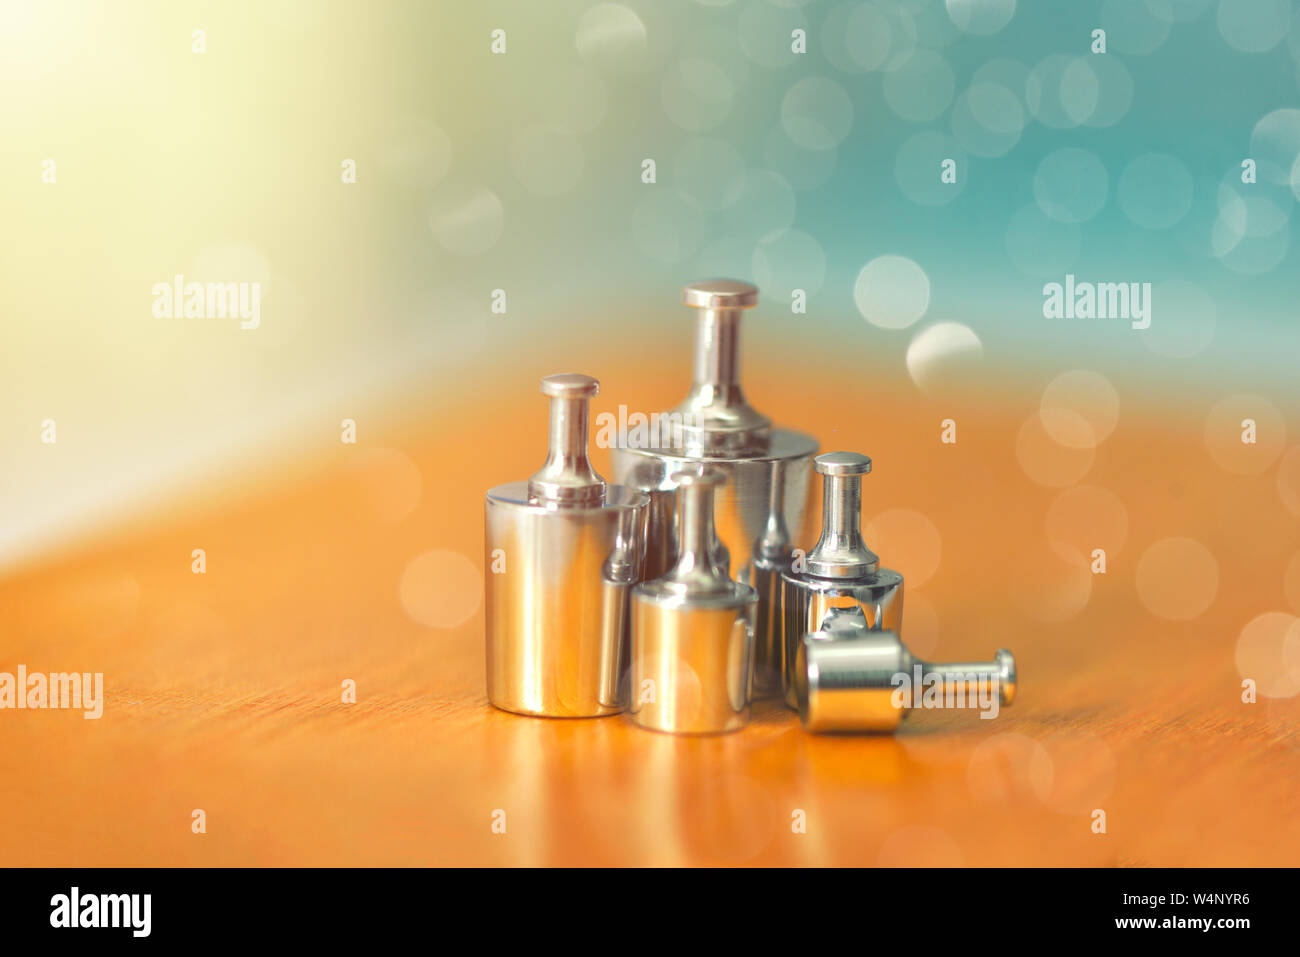 Set of metal weights for scales and the calibration test. Weight set for calibration balance to accuracy and precision. Apothecary, pharmacist, scient Stock Photo